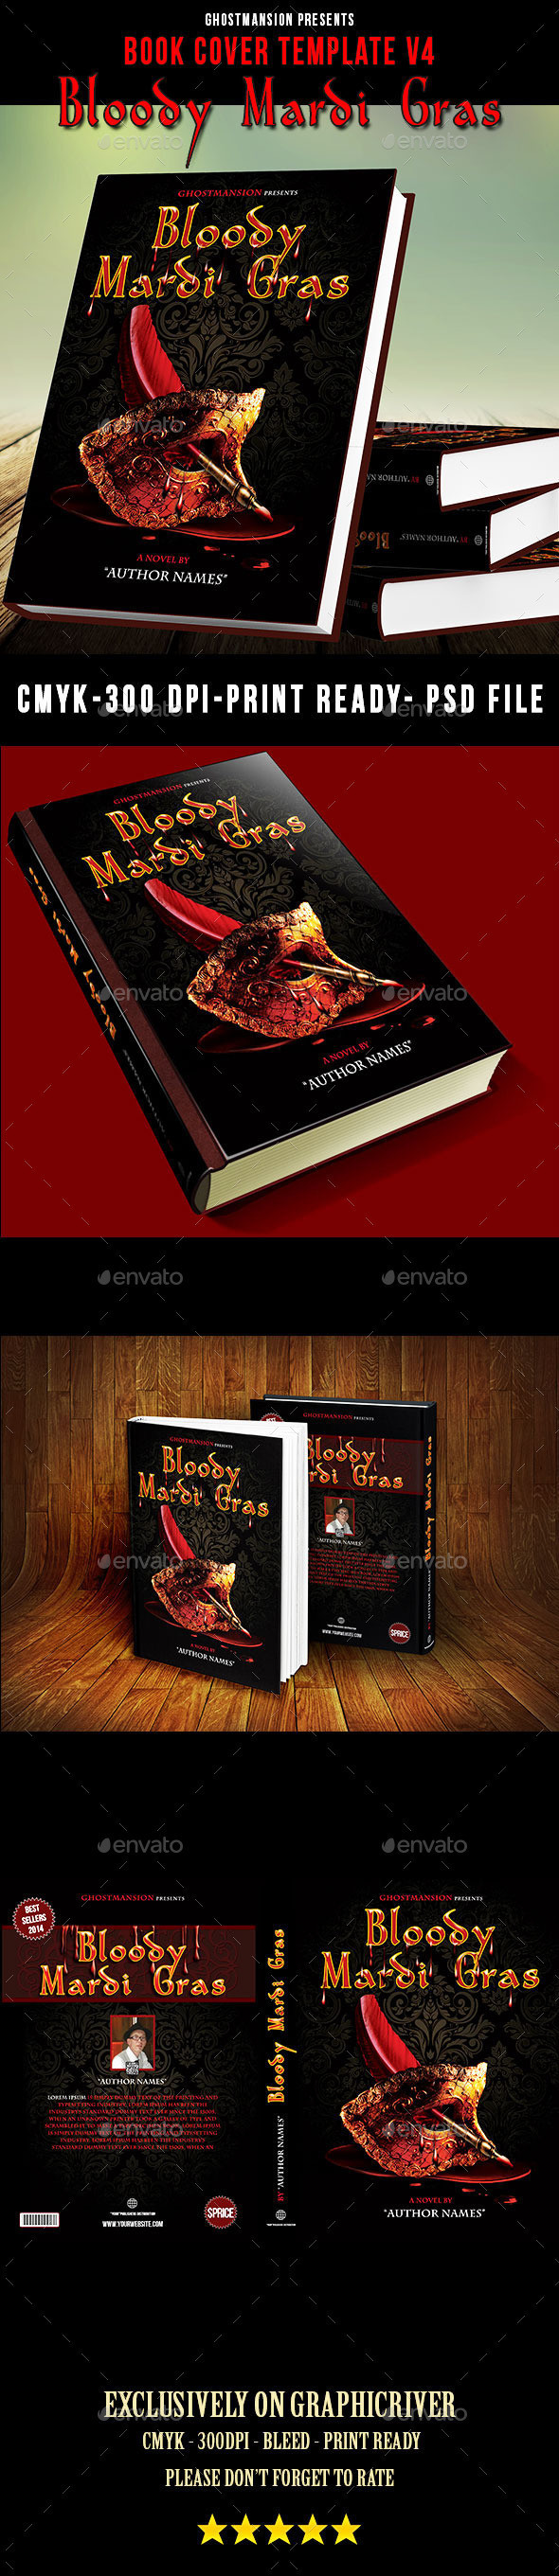 Preview 20book 20cover 20template 20v4 20bloody 20mardi 20gras